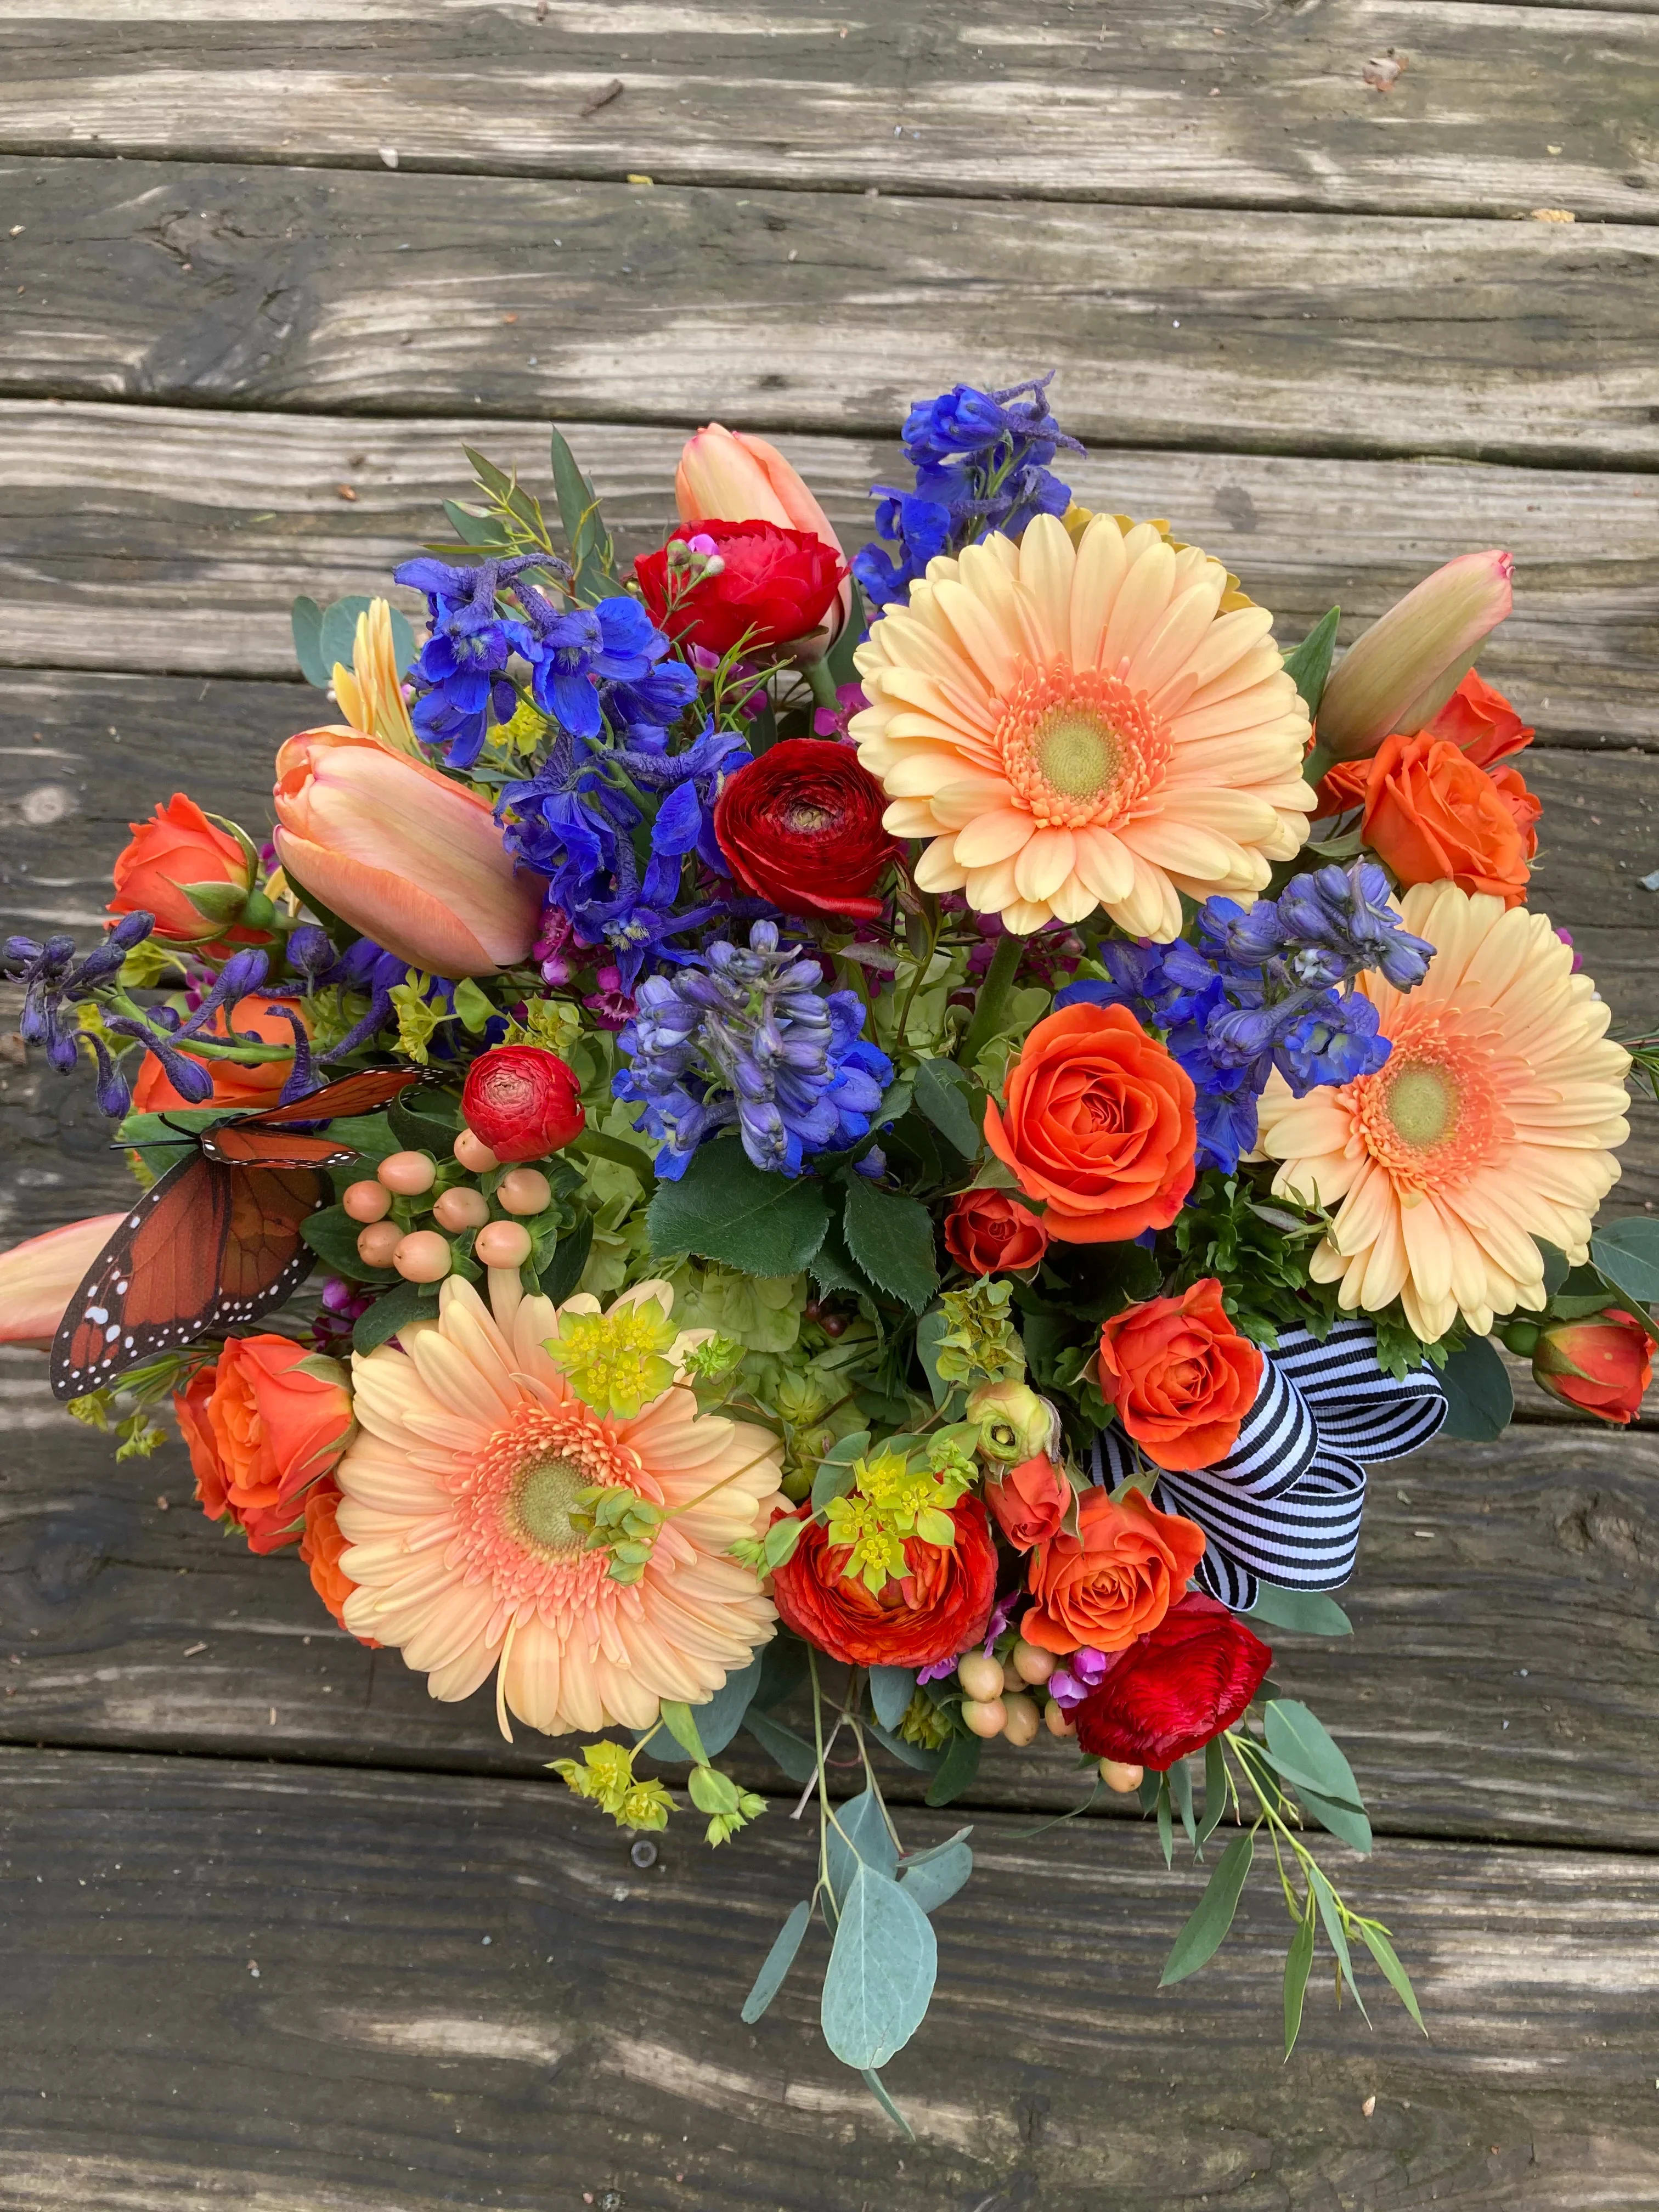 Summer Pleasures - A colorful mixed bouquet with gerberas, delphinium, ranunculus, and spray roses.